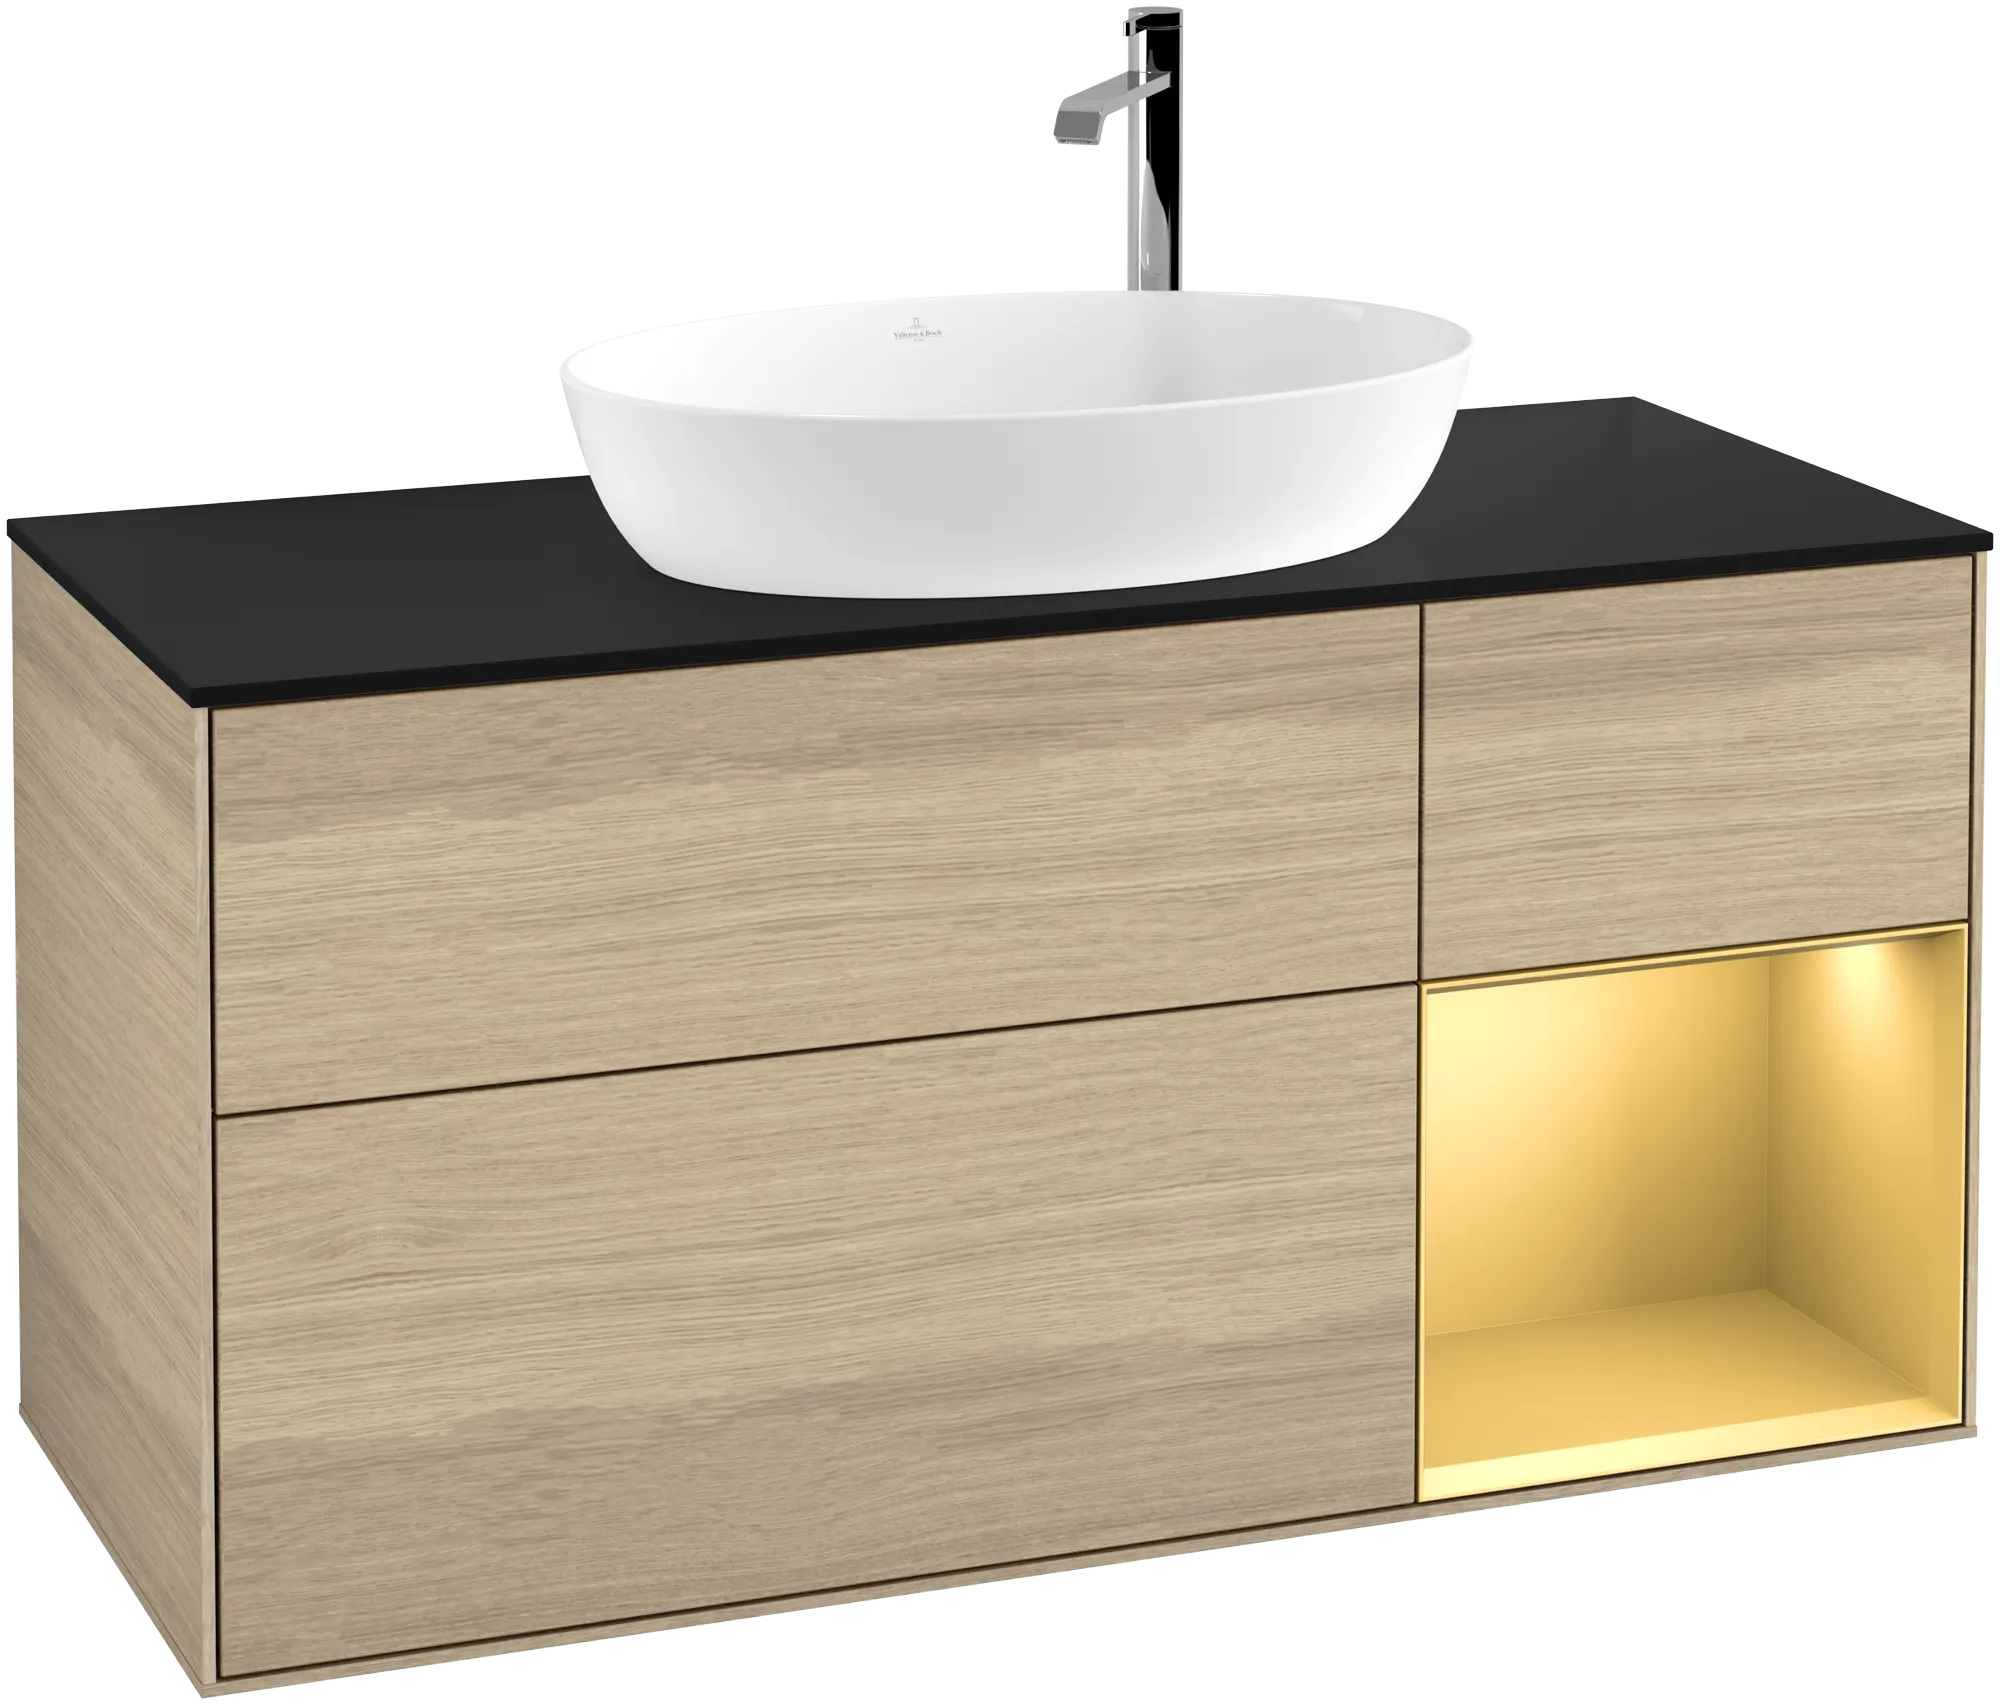 Picture of VILLEROY BOCH Finion Vanity unit, with lighting, 3 pull-out compartments, 1200 x 603 x 501 mm, Oak Veneer / Gold Matt Lacquer / Glass Black Matt #G952HFPC